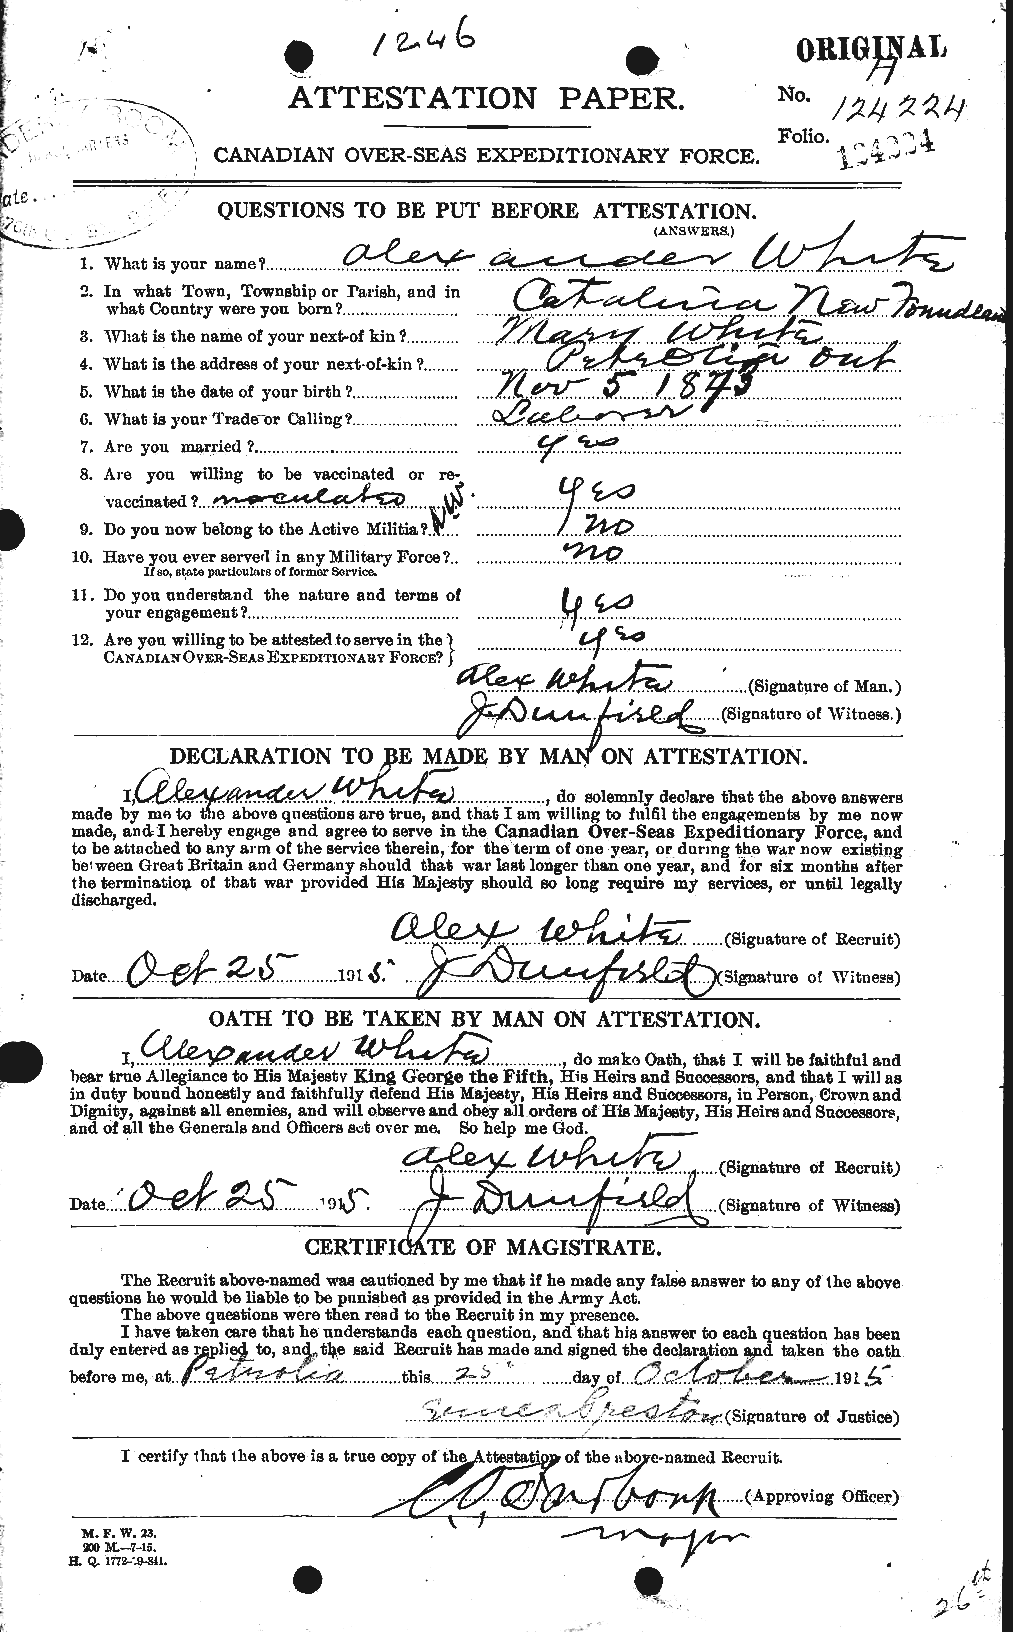 Personnel Records of the First World War - CEF 669760a